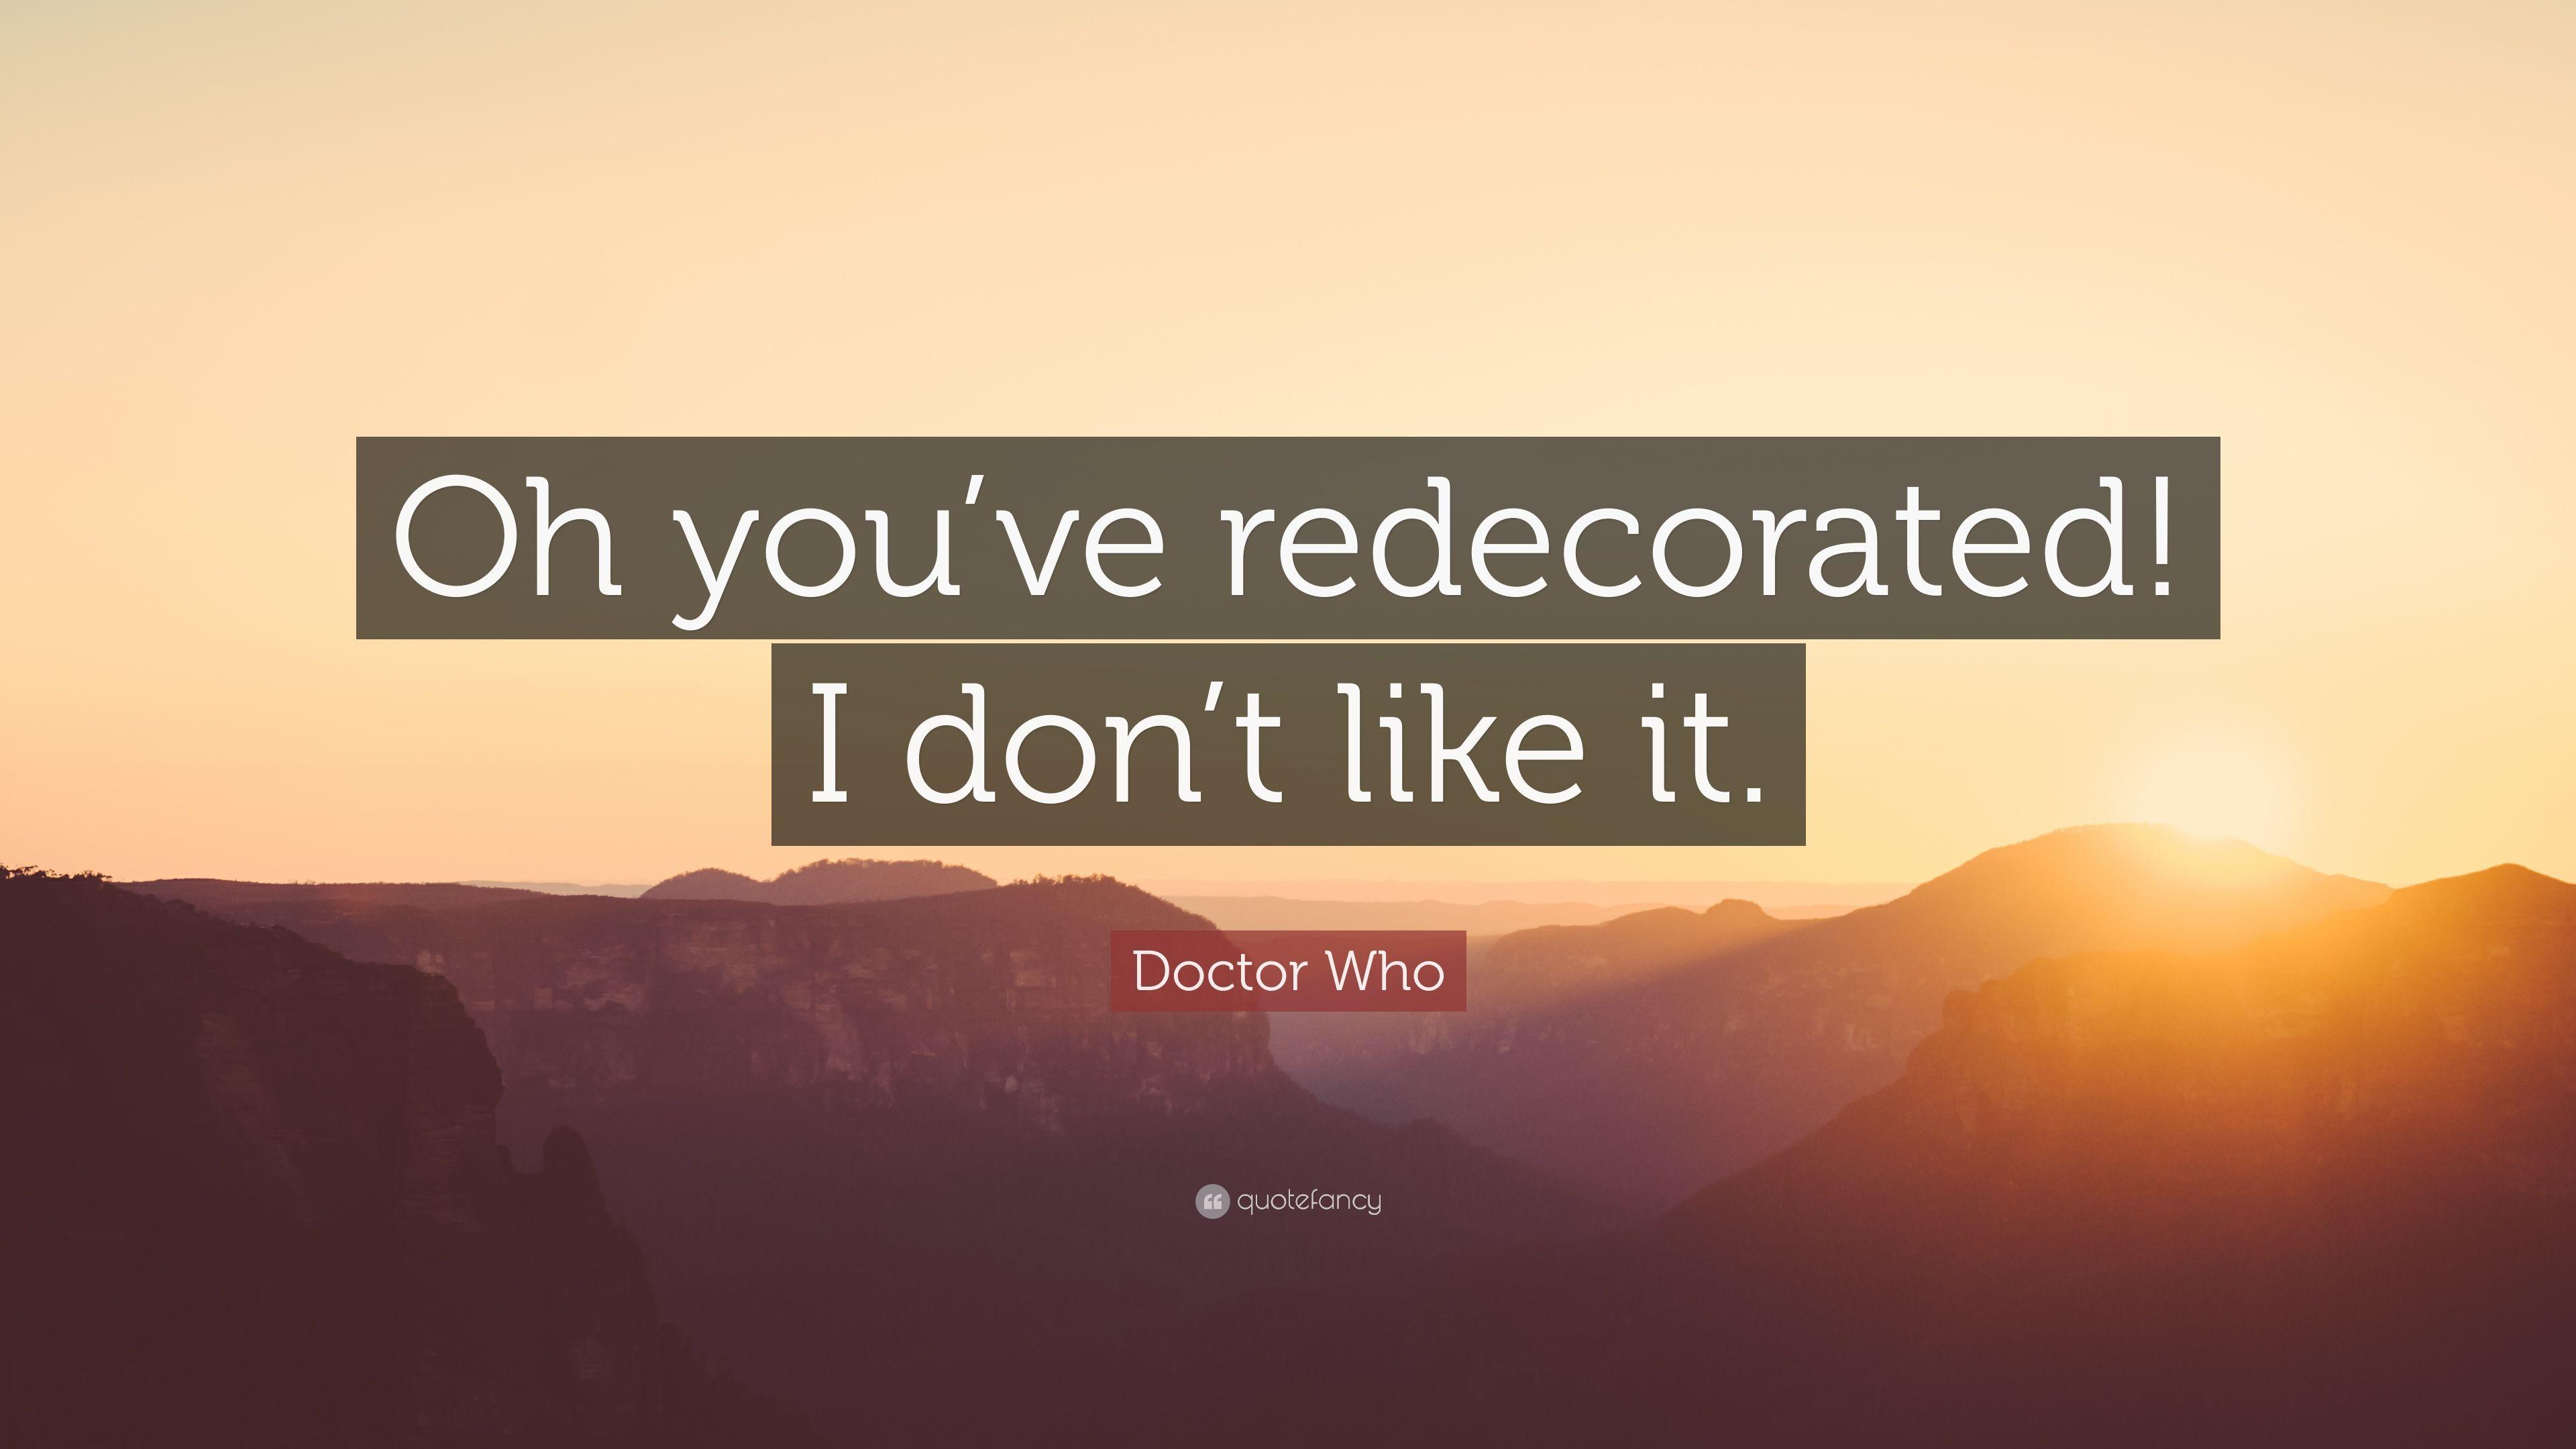 Doctor Who Quotes (2021 Update)